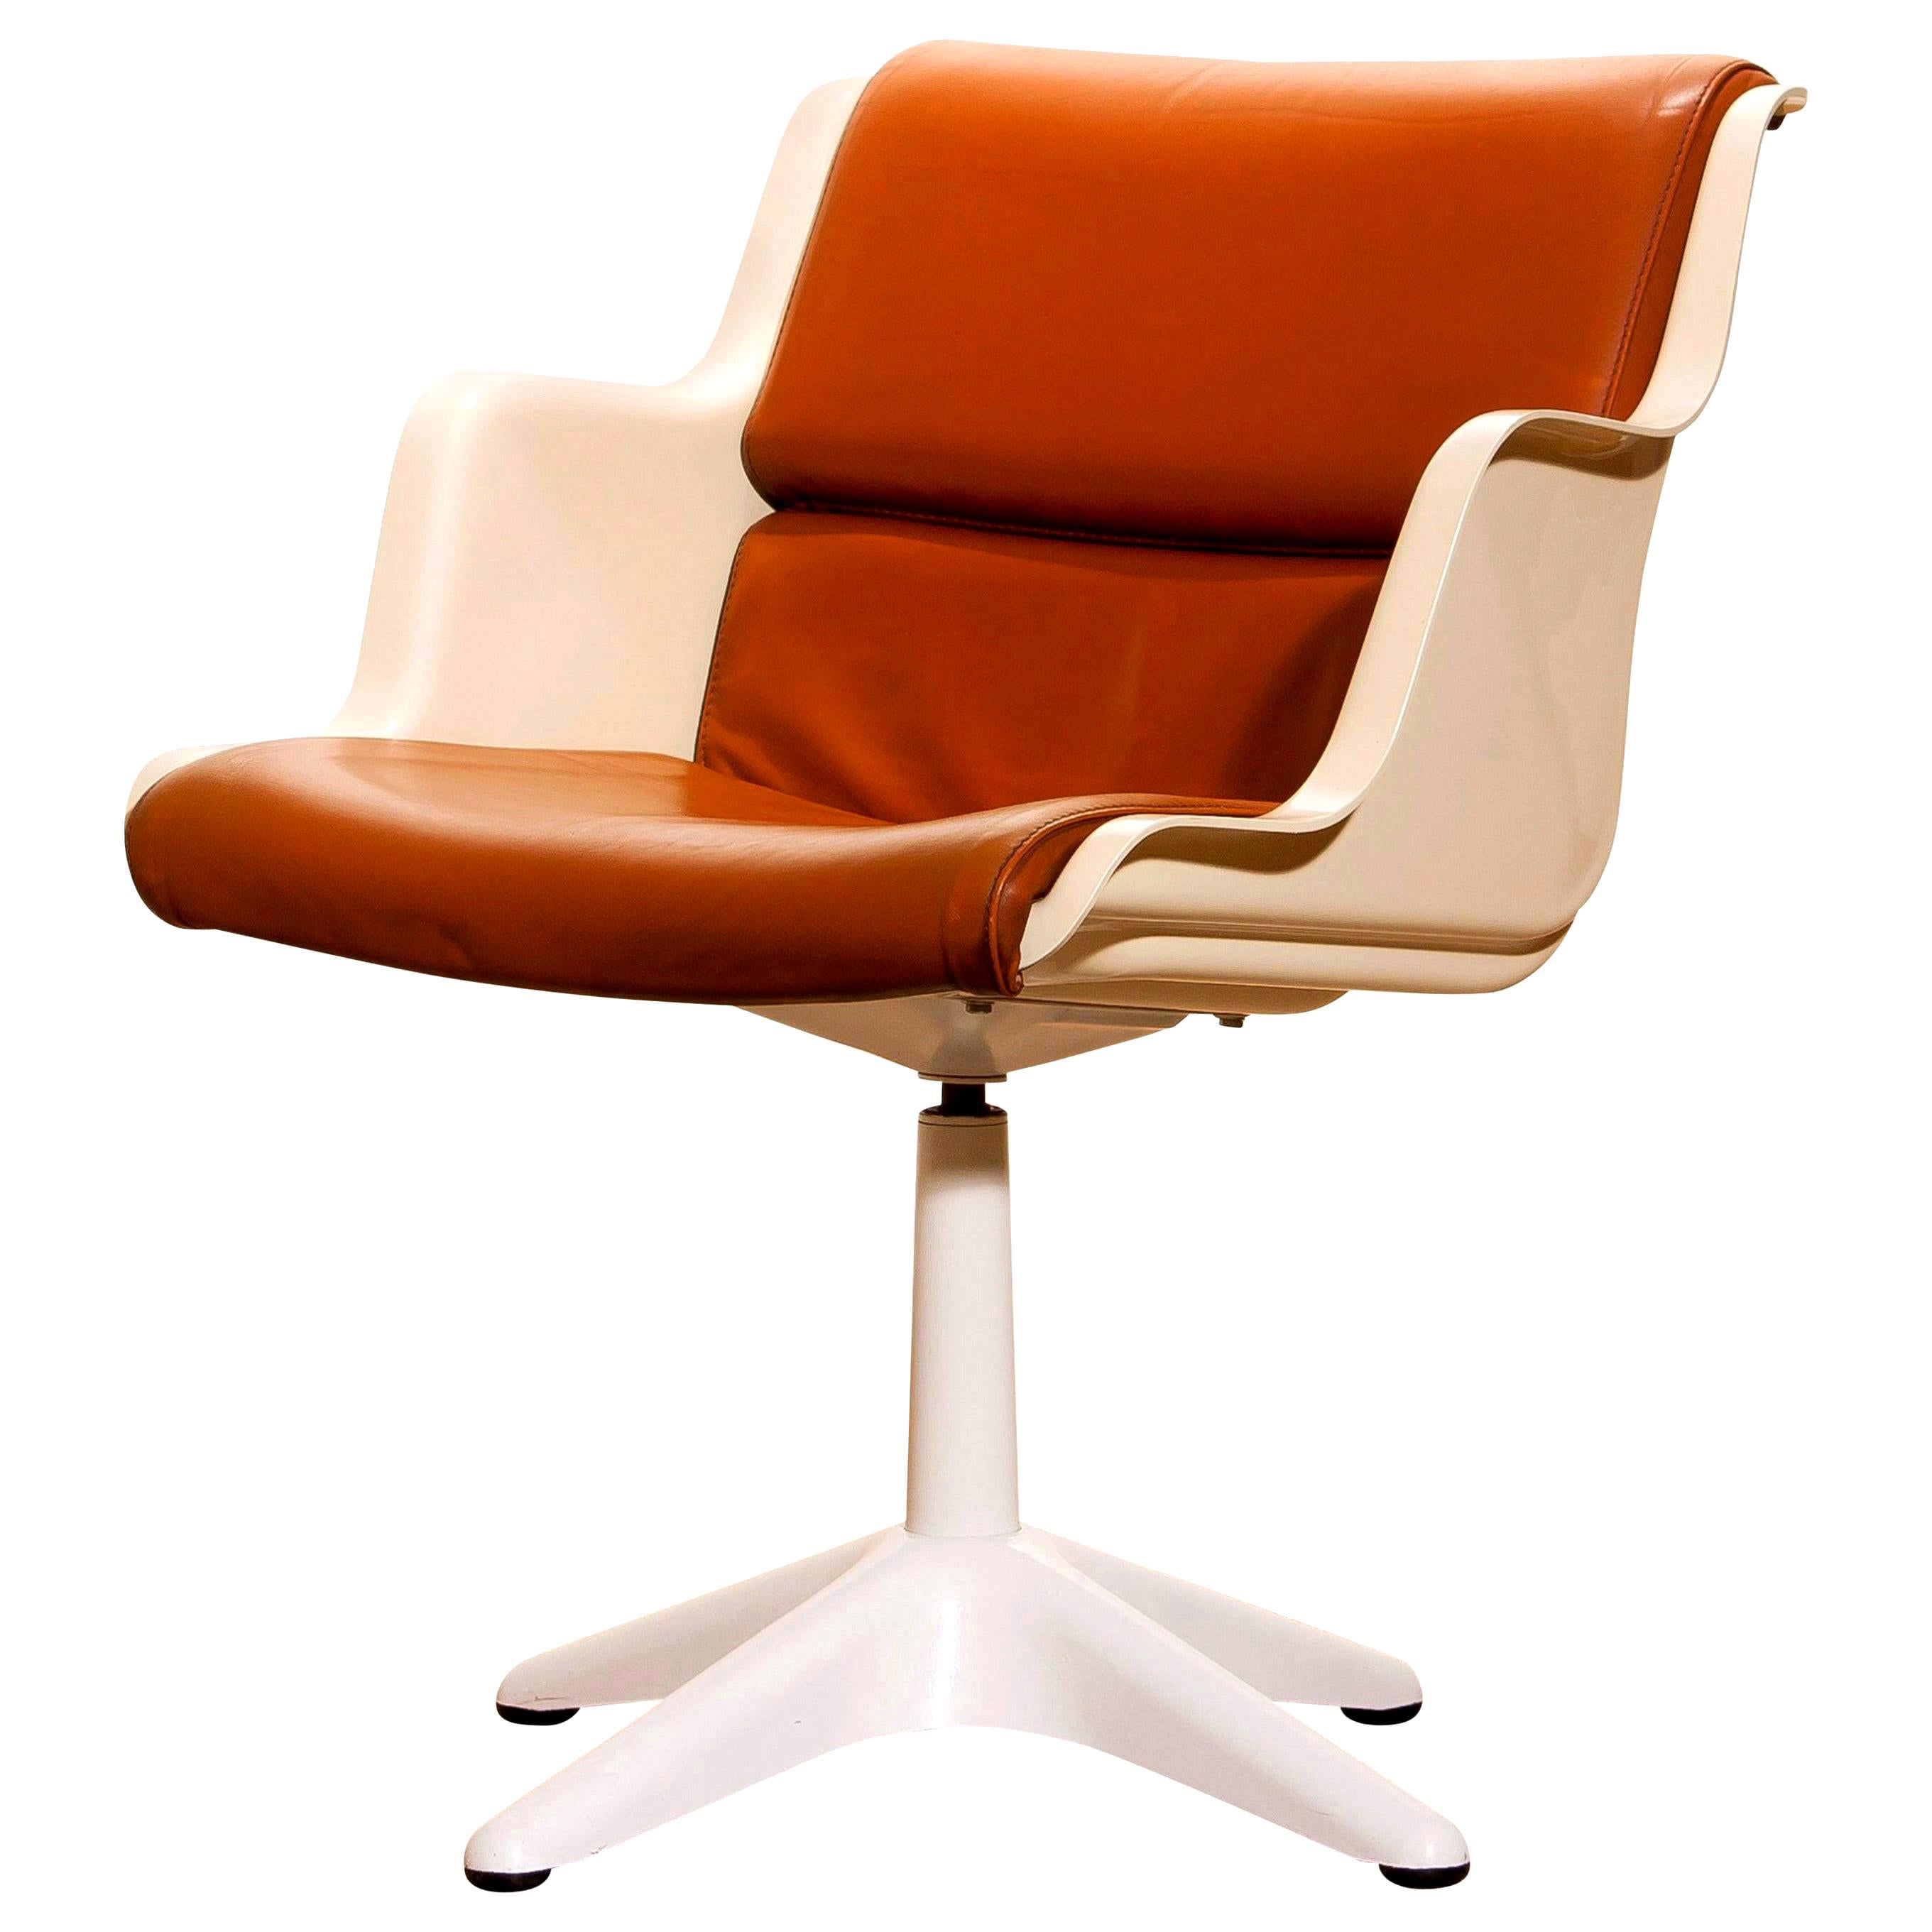 Beautiful desk chair designed by Yrjö Kukkapuro for Haimi, Finland.
This chair is made of a cognac leather seating in an off-white fiberglass shell on a white lacquered metal swivel stand.
The chair is labeled.
It is in a very nice